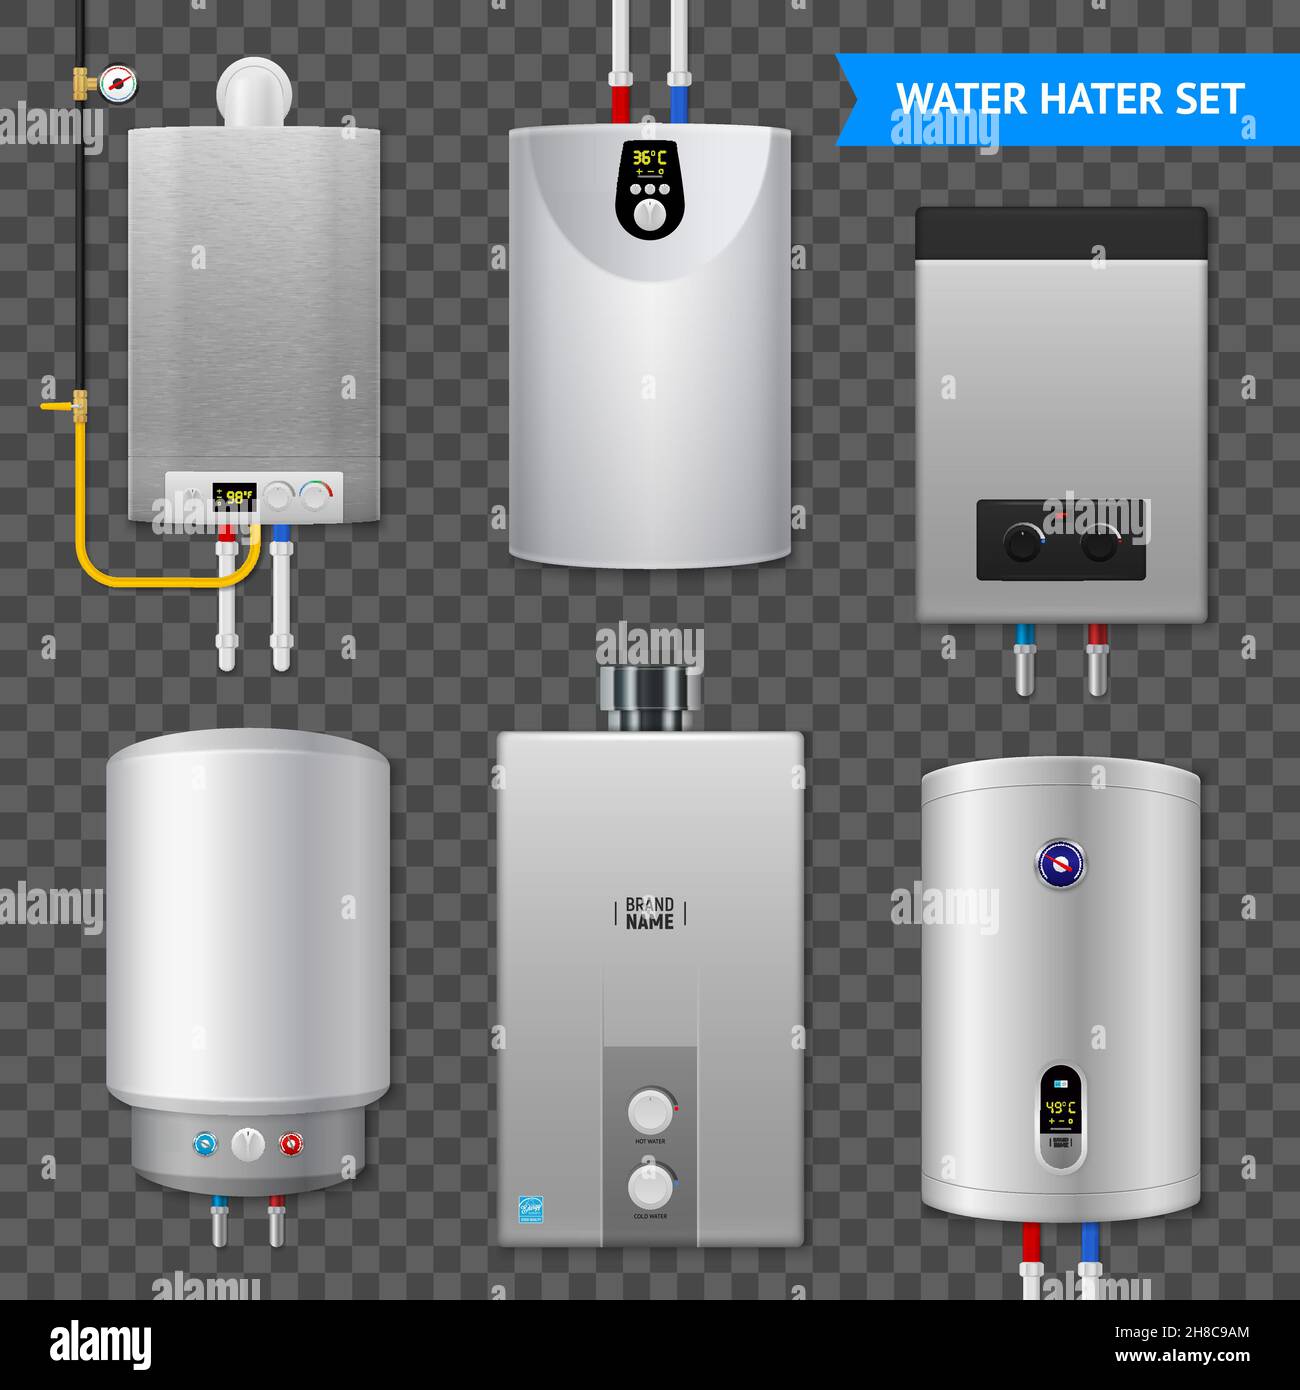 https://c8.alamy.com/comp/2H8C9AM/realistic-electric-water-heater-boiler-transparent-icon-set-with-isolated-elements-on-transparent-background-vector-illustration-2H8C9AM.jpg